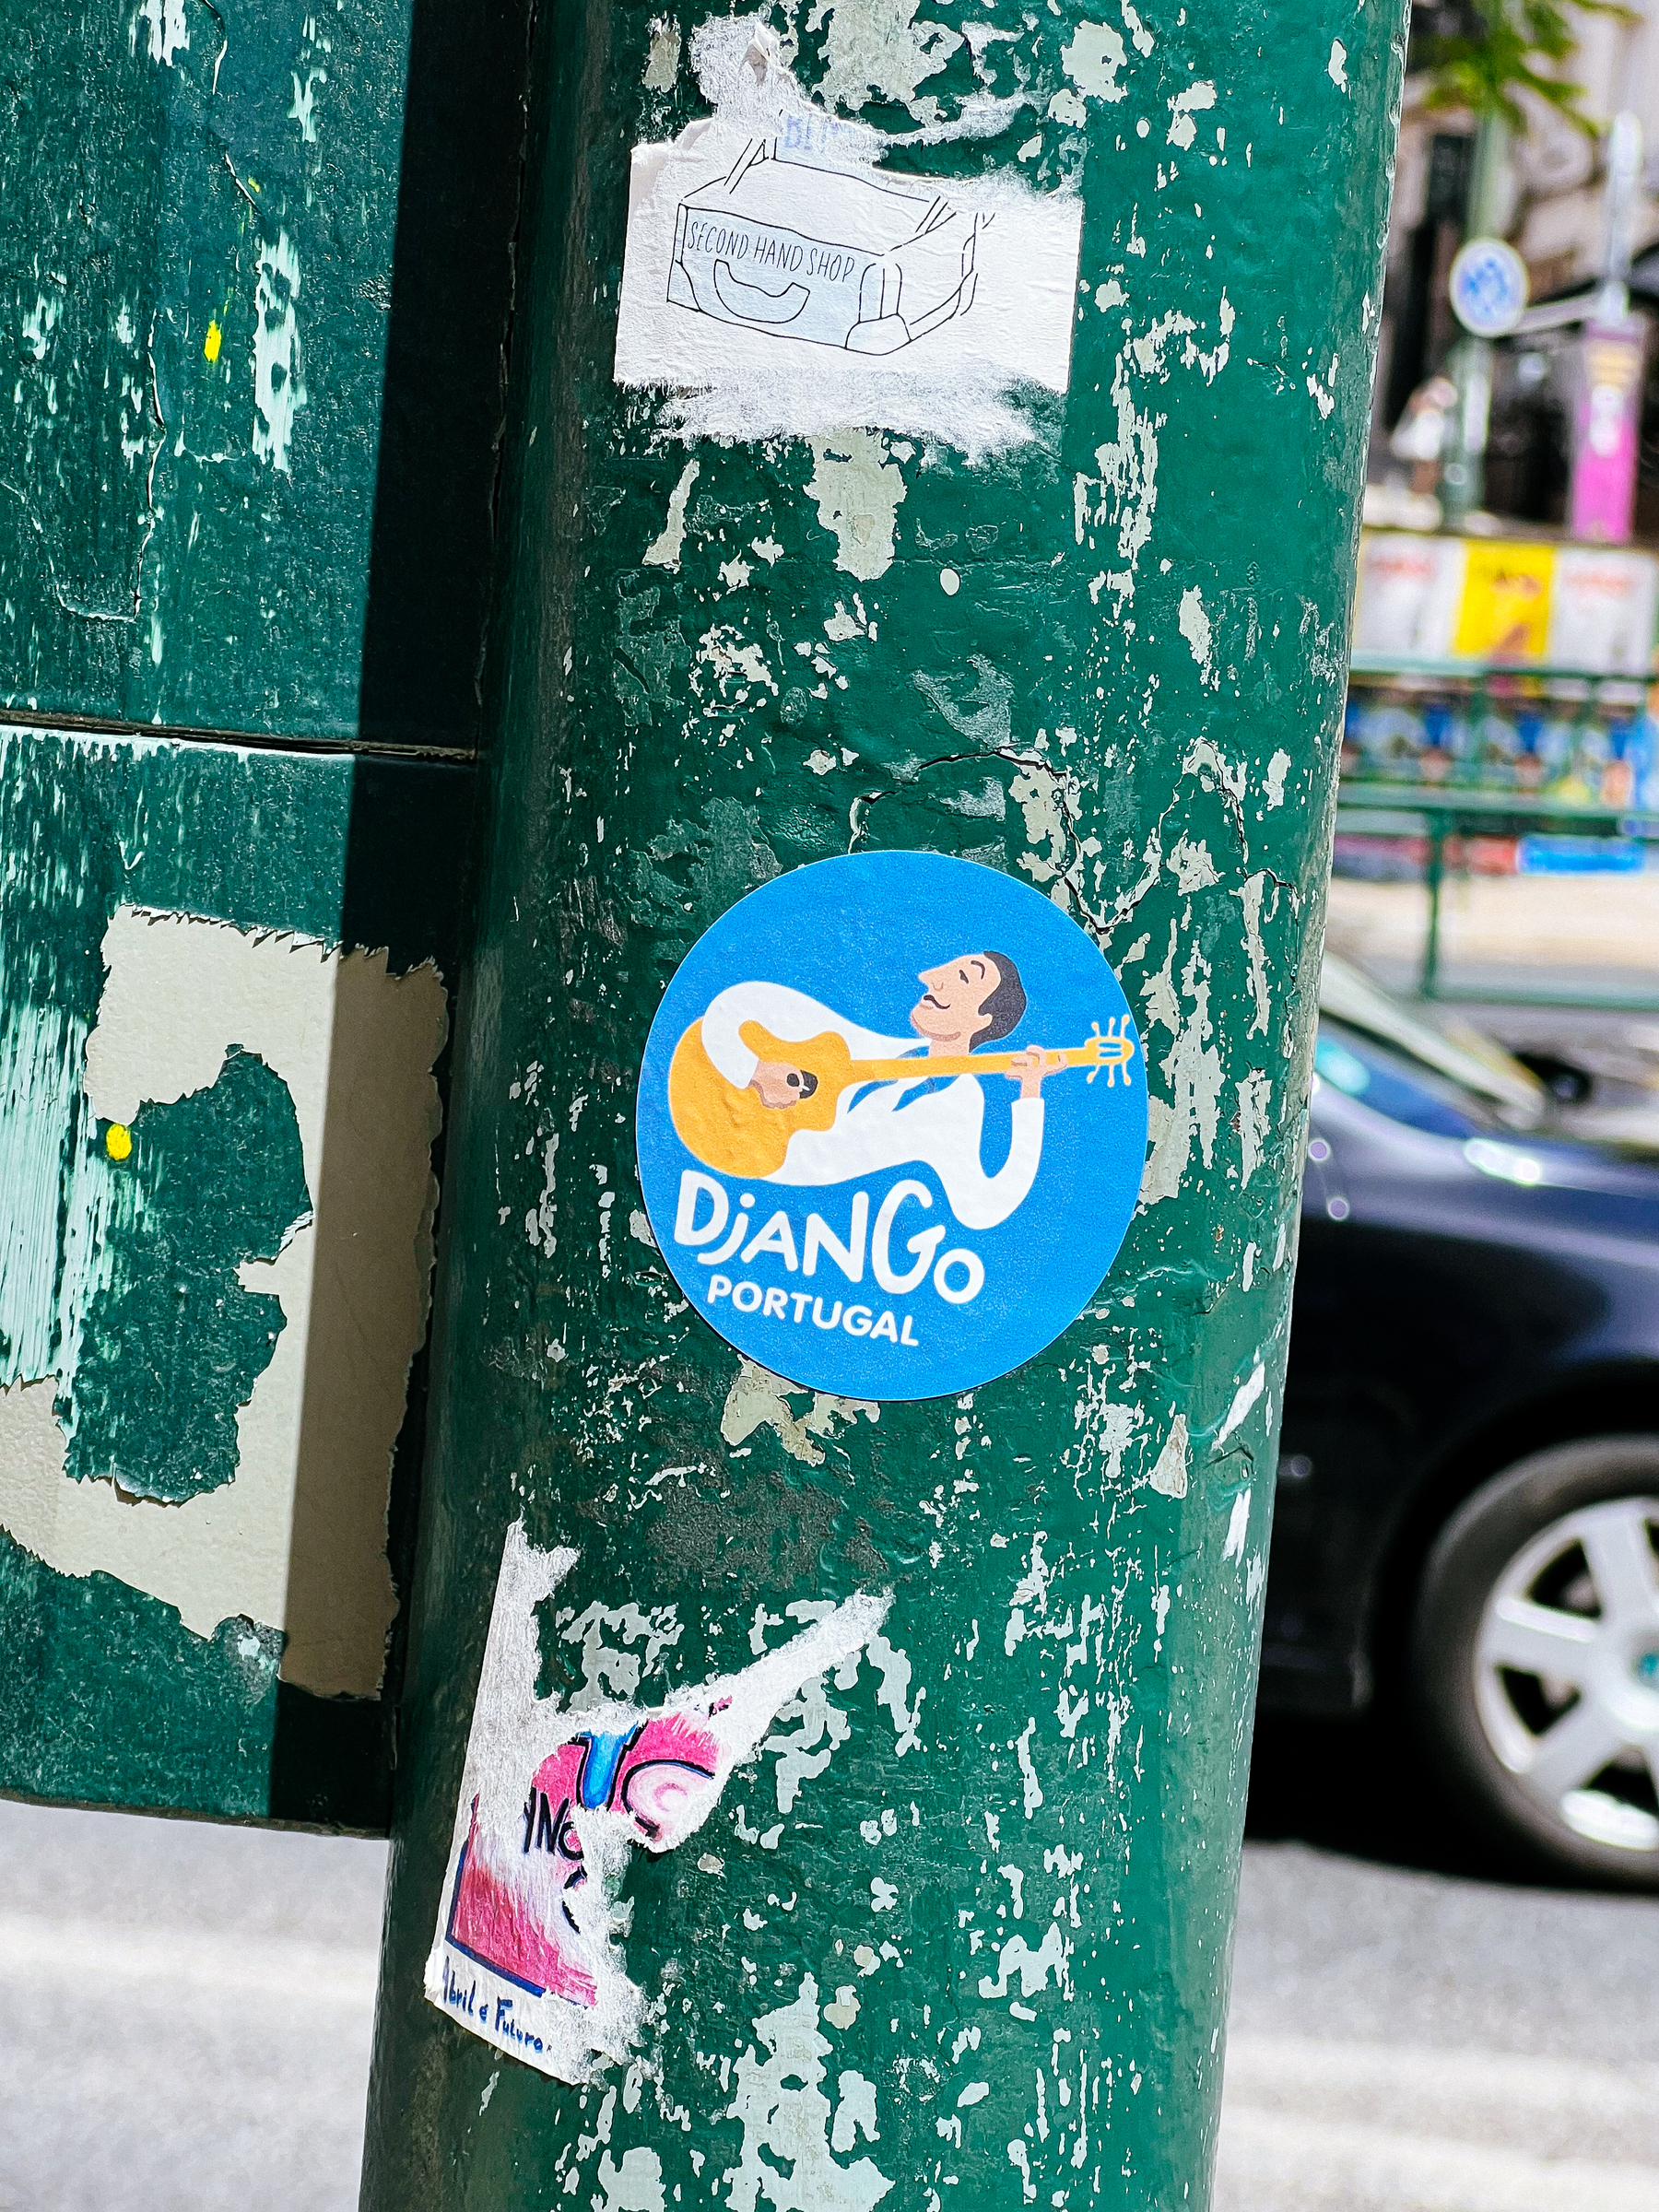 A man playing a guitar, and “Django Portugal”. Drawing, on a sticker. 